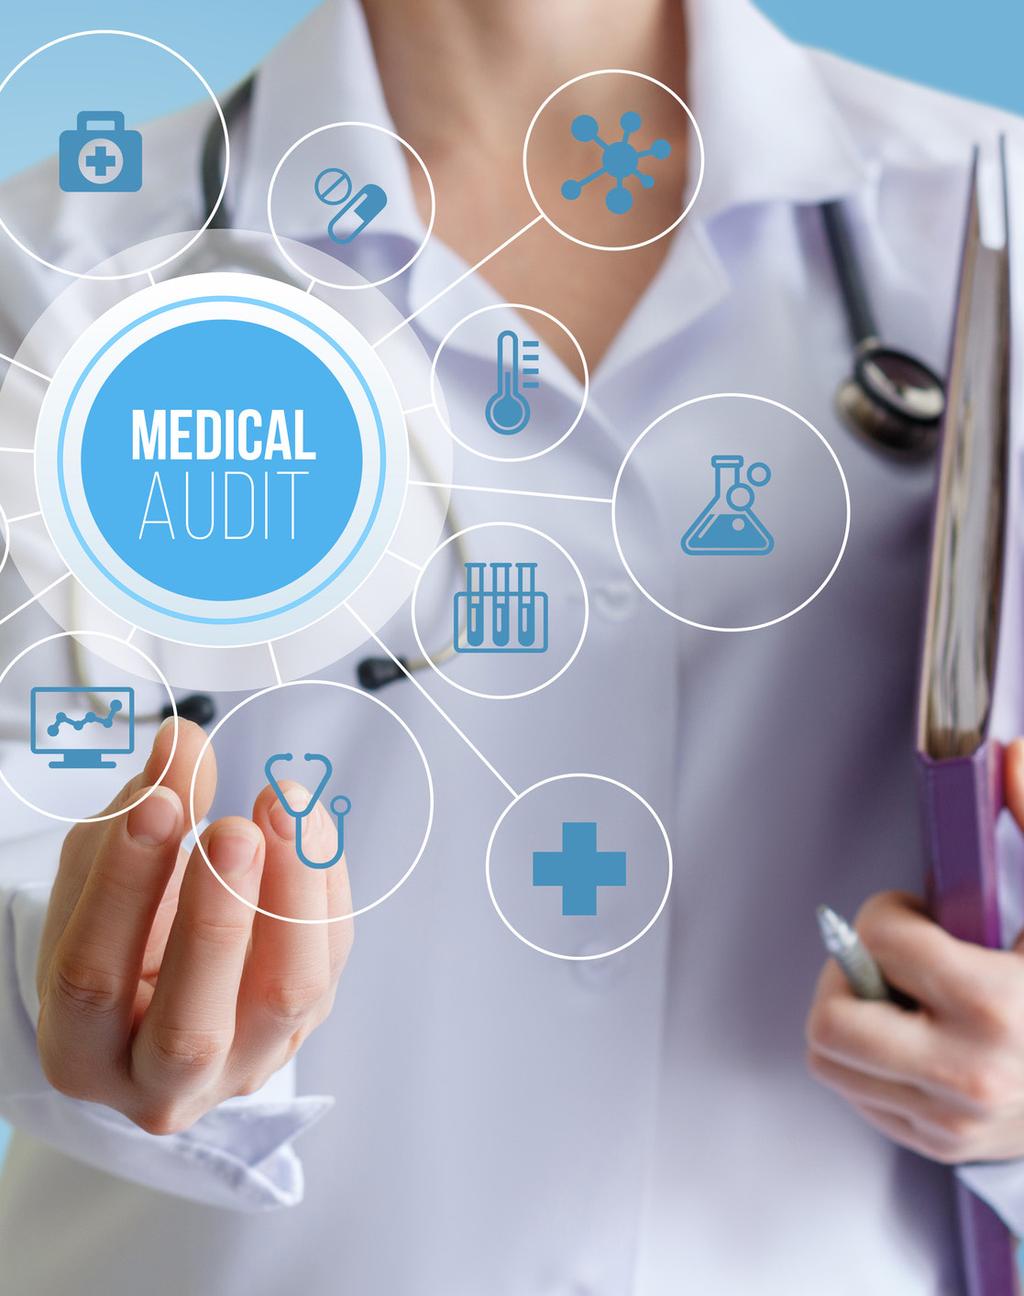 Summary Review contractors issue an estimated 2 million requests each year for medical documentation, according to the Centers for Medicare and Medicaid Services (CMS).